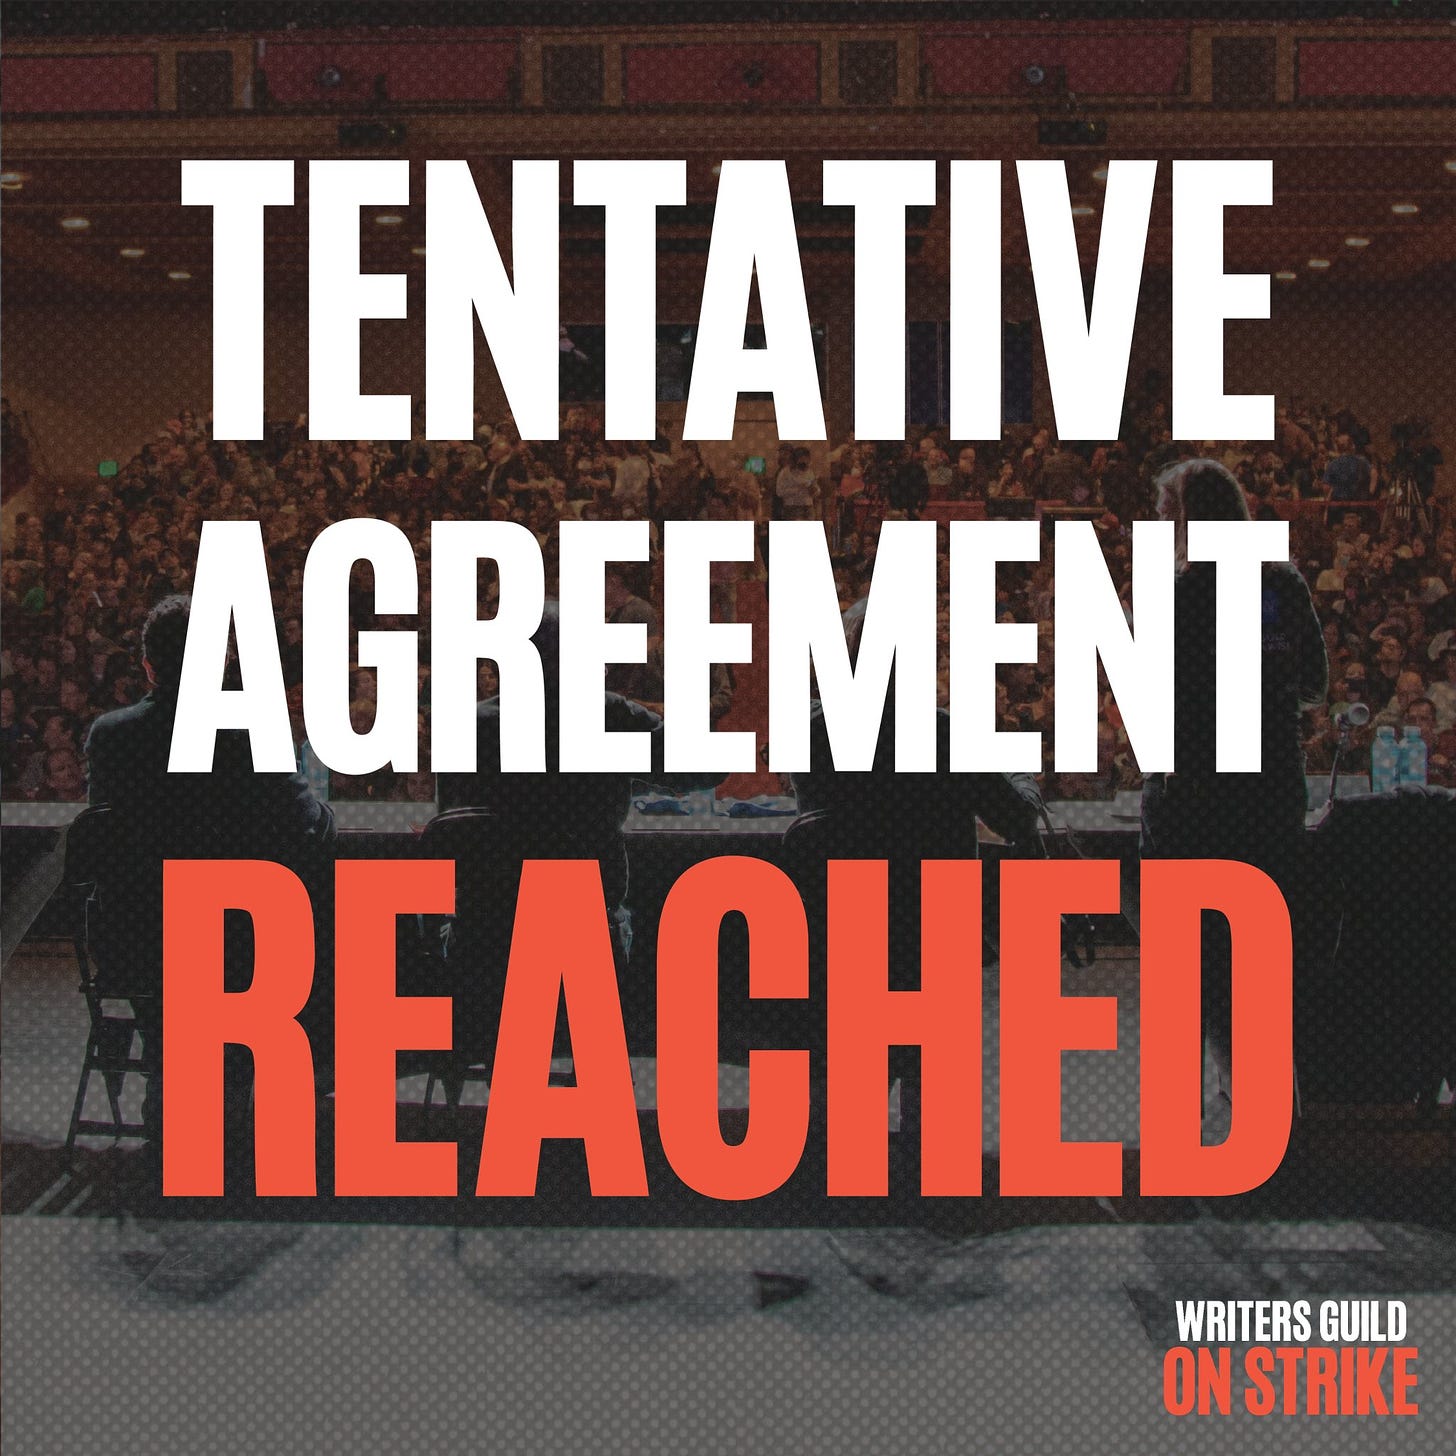 Tentative agreement reached!